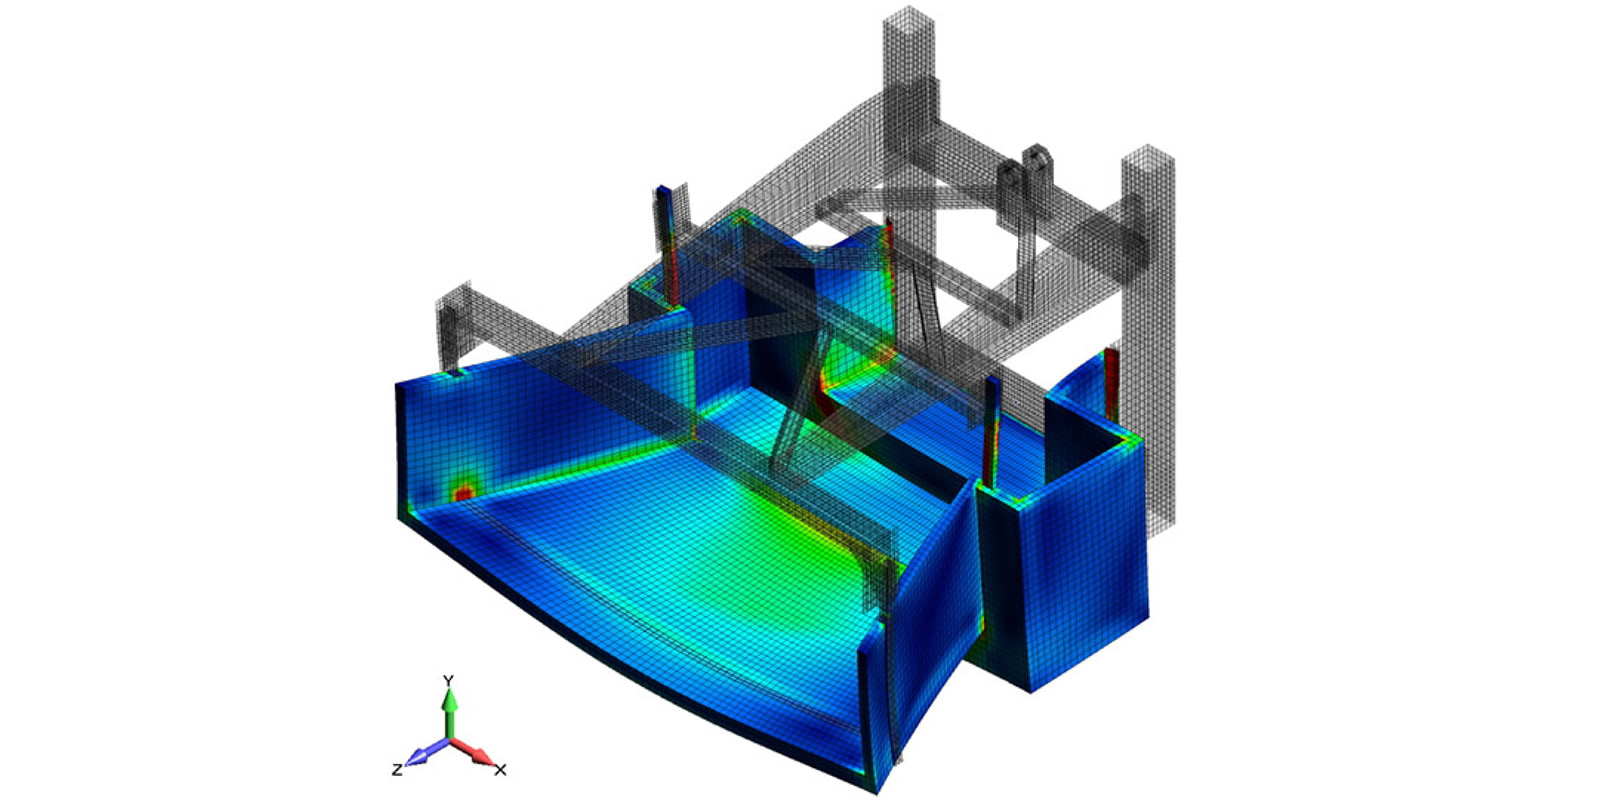 Stress results contoured over the steel components of the composite structure - Finite Element Analysis Engineering Services